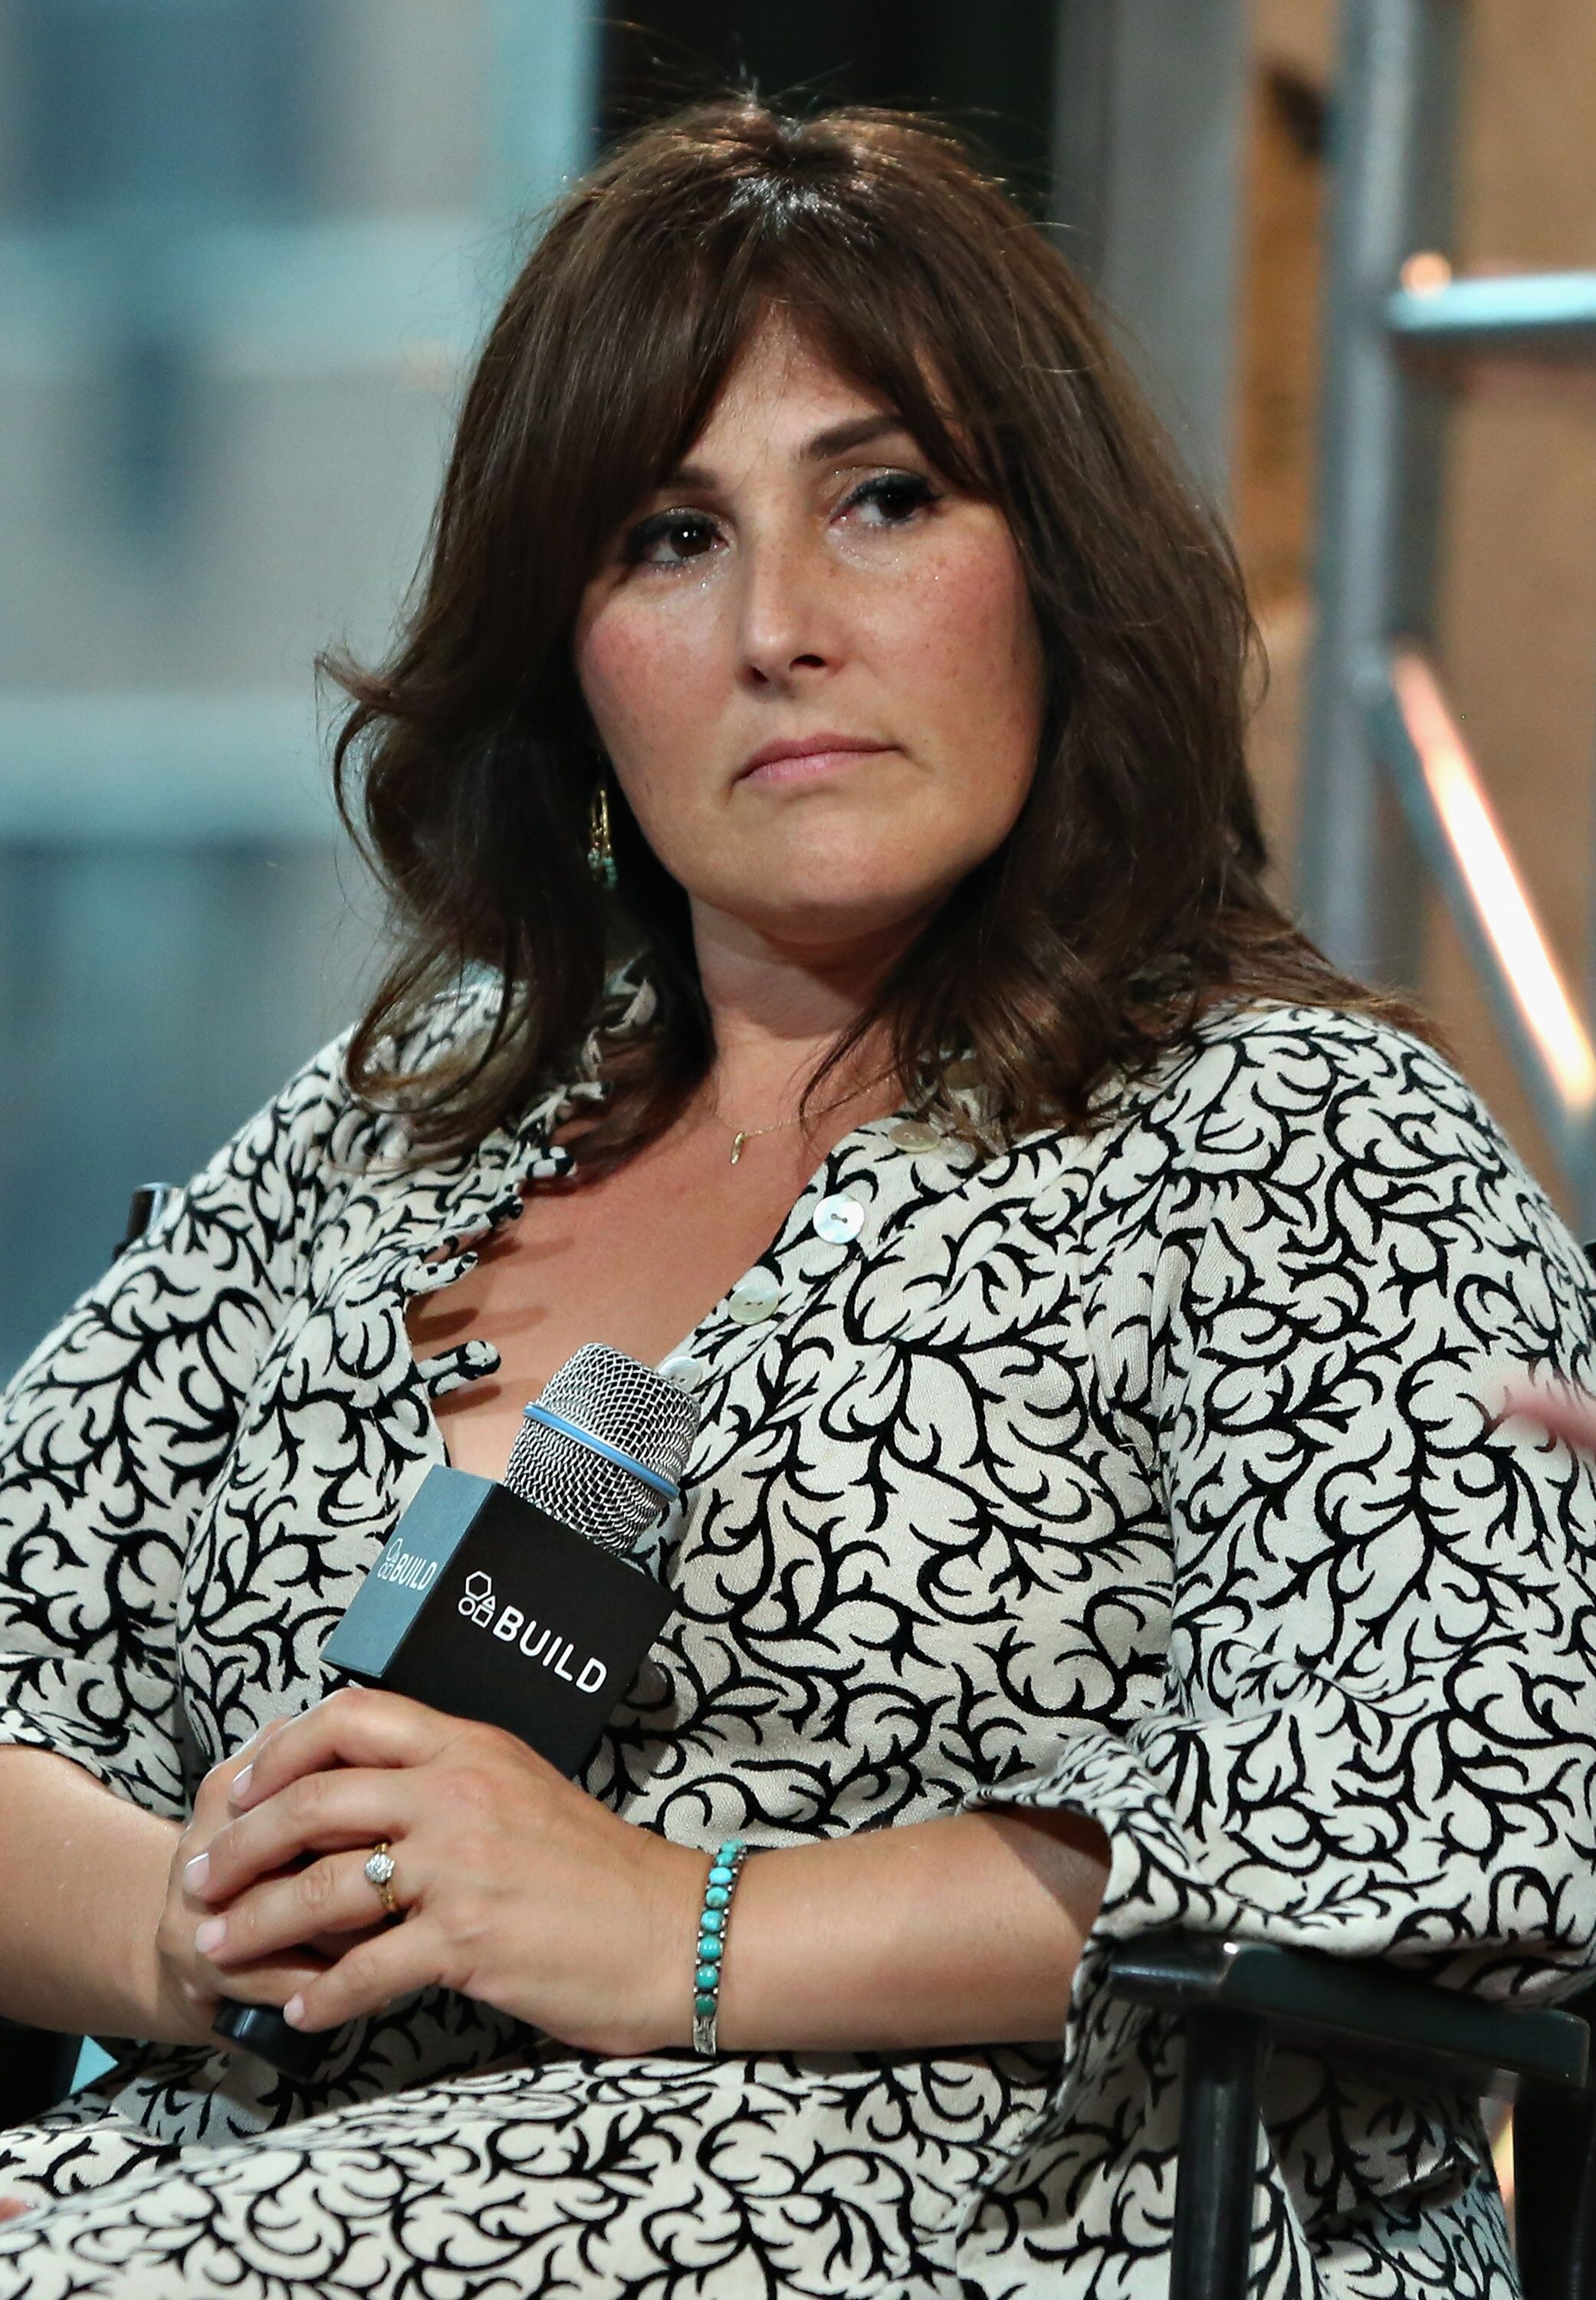 Ricki Lake attends AOL Build to discuss 'Mama Sherpas' at AOL Studios on August 10, 2015 in New York City. | Source: Getty Images